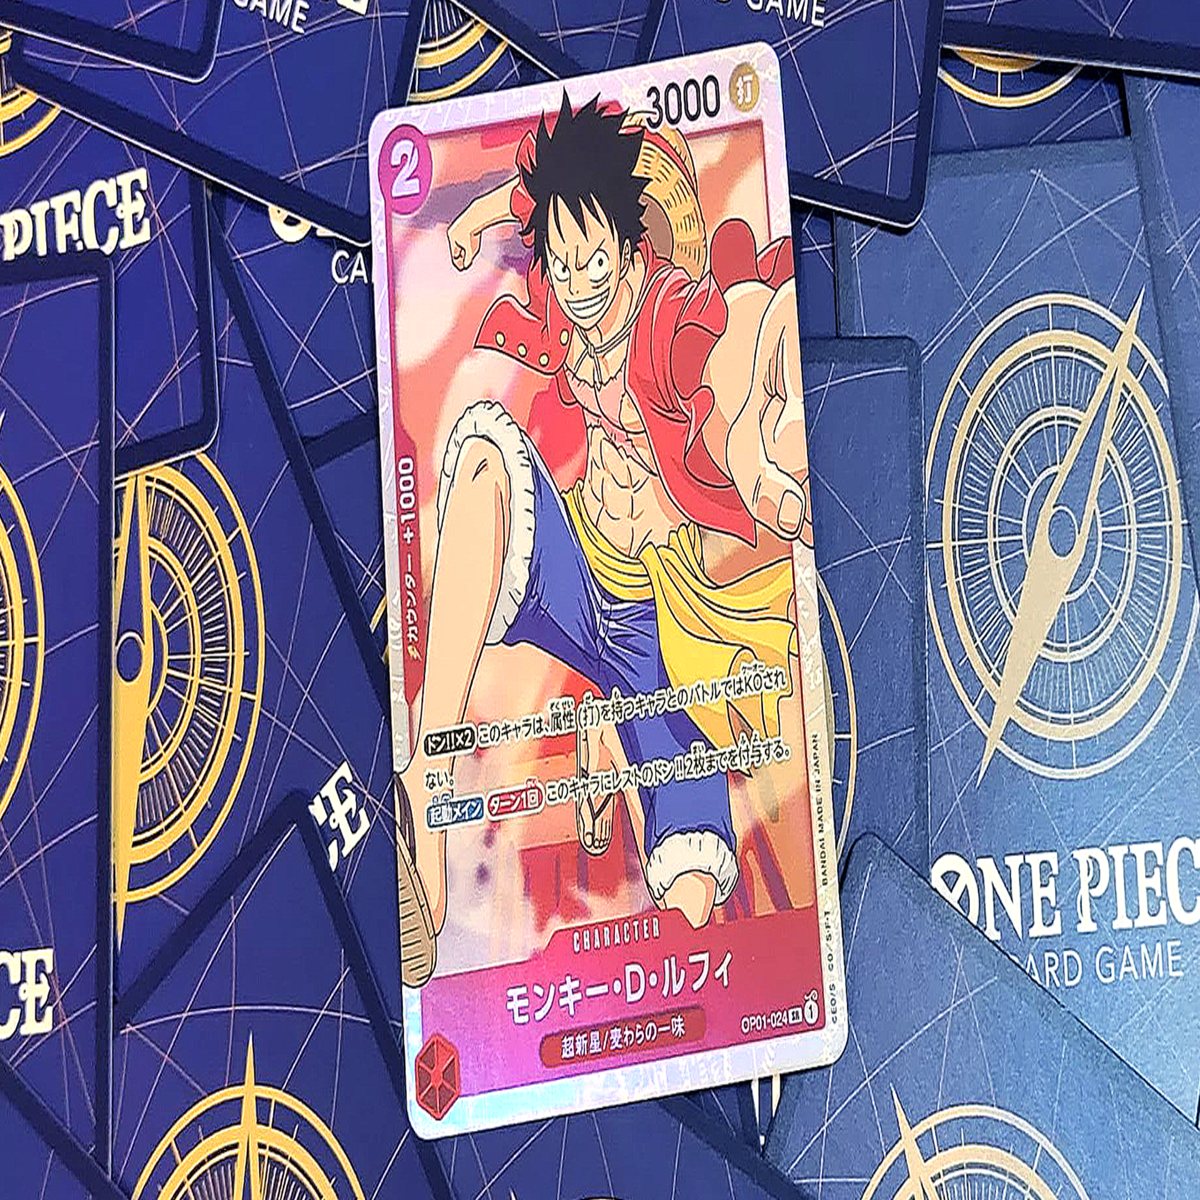 Anime Pirates Game Lets You be Part of Popular Manga 'One Piece' World